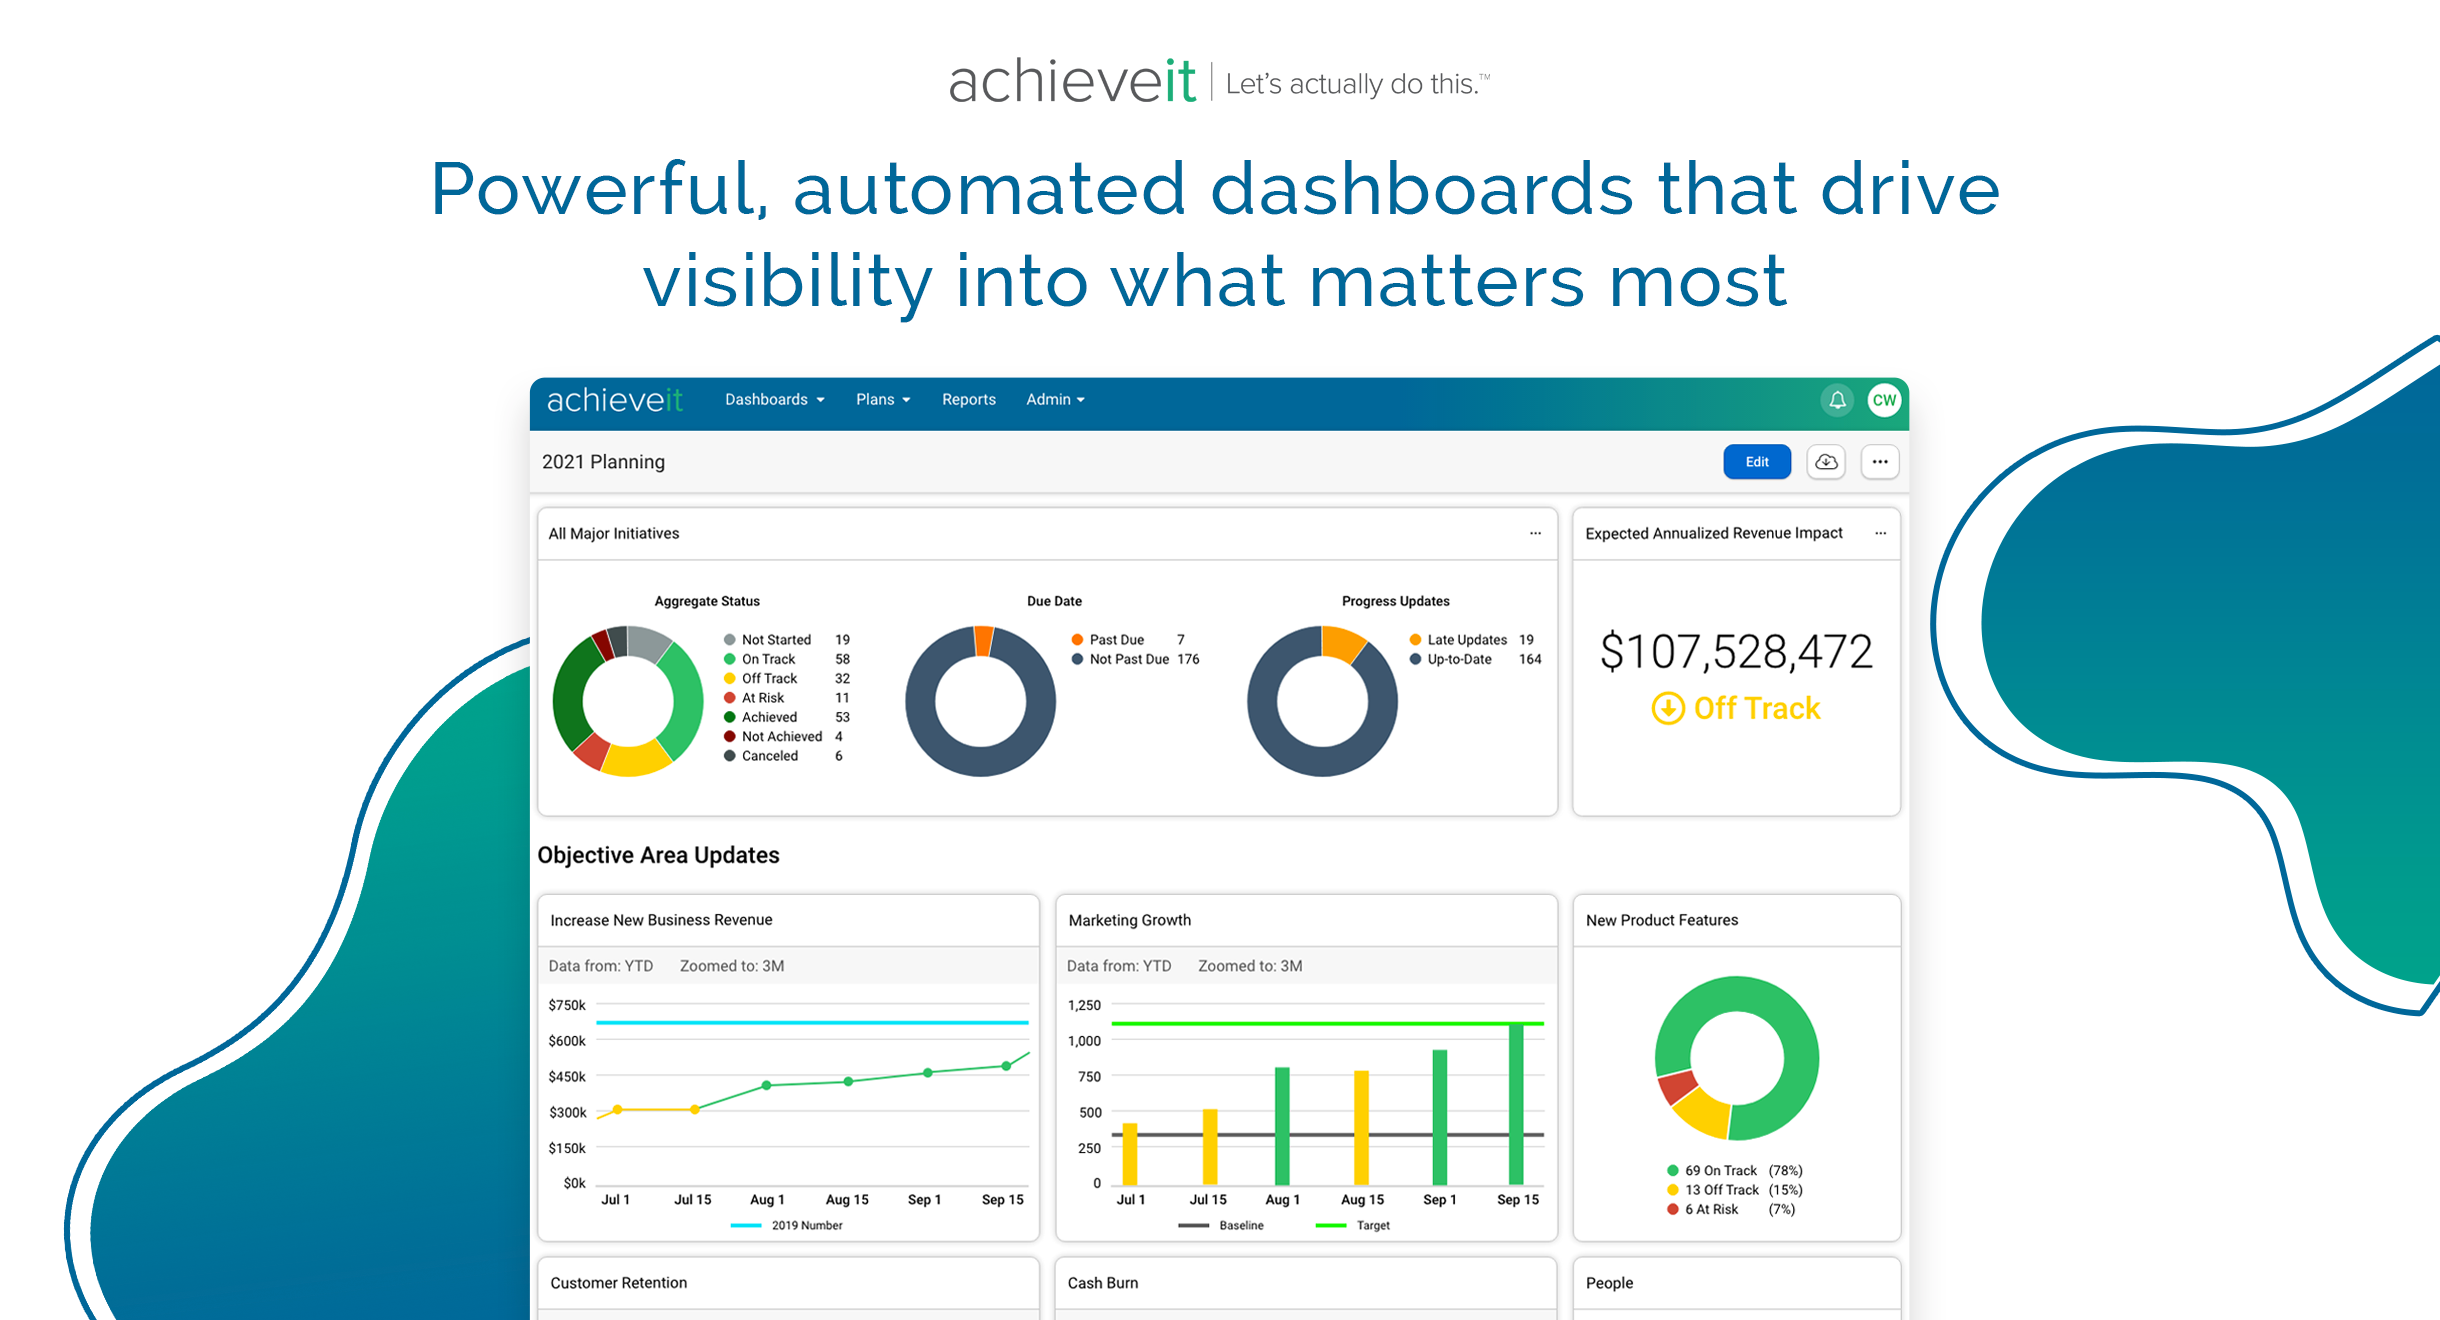 Make confident & informed decisions based on up-to-date information & automated dashboards. With custom dashboards, you can deliver the right insights across your organization to make quicker decisions & drive execution.